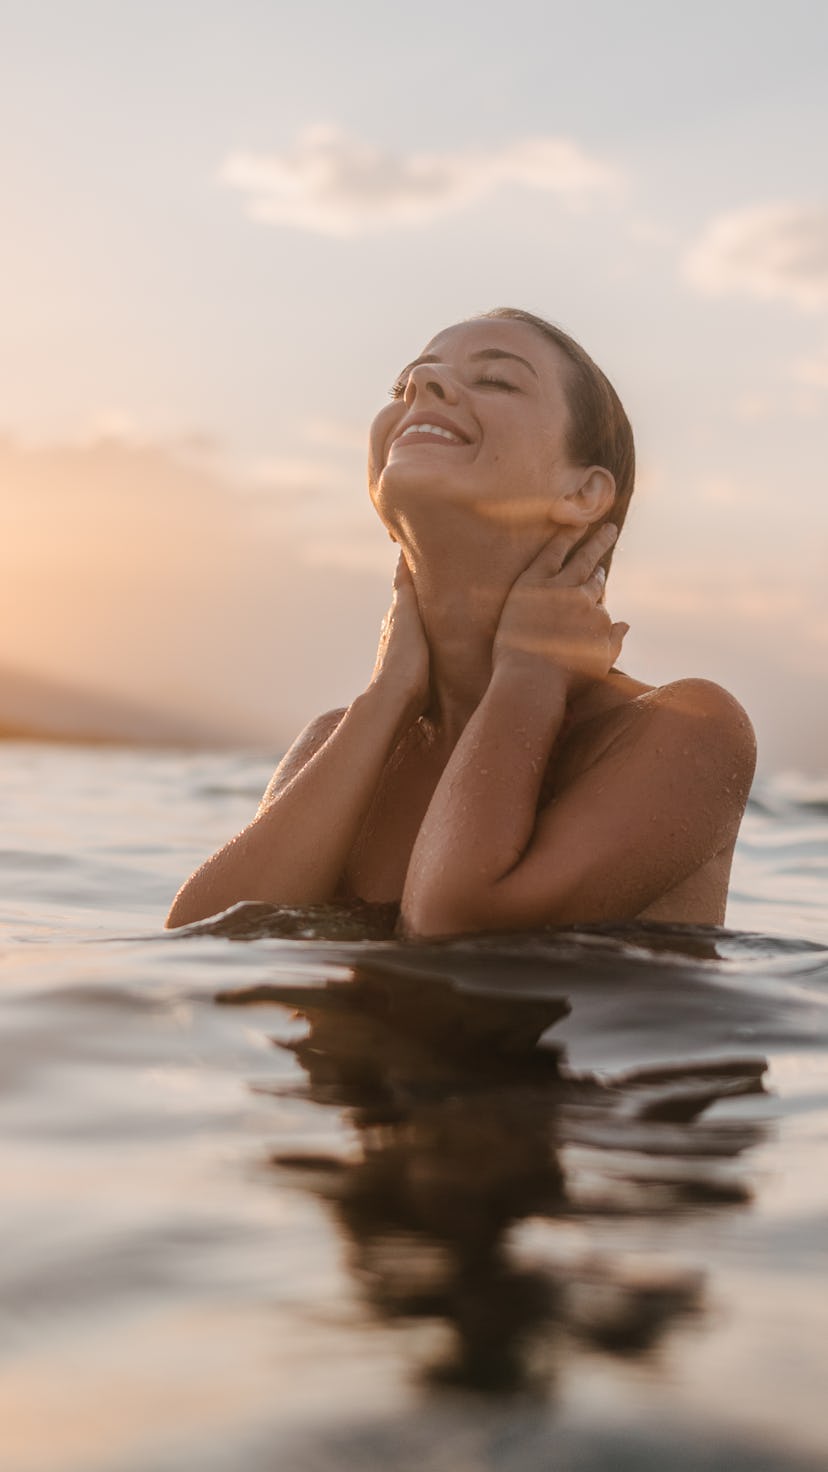 A young woman in sea water enjoying the sea and the sunset. Mercury Retrograde spring 2022 do's and ...